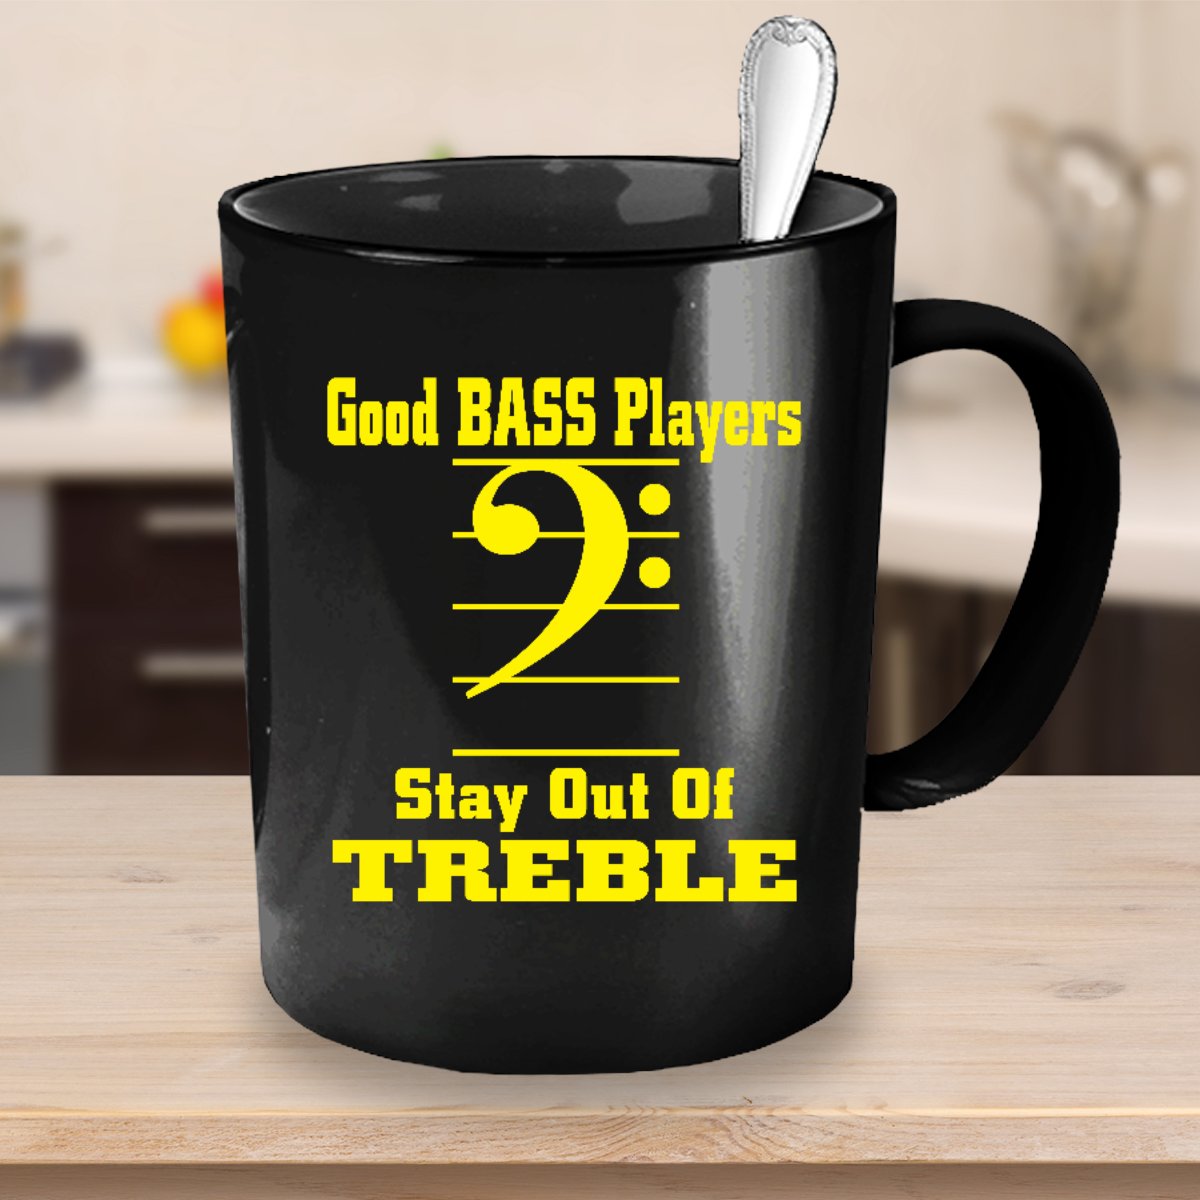 Good #BASS players stay out of TREBLE! Fun #musician mug. the-vip-emporium.com/collections/fu…